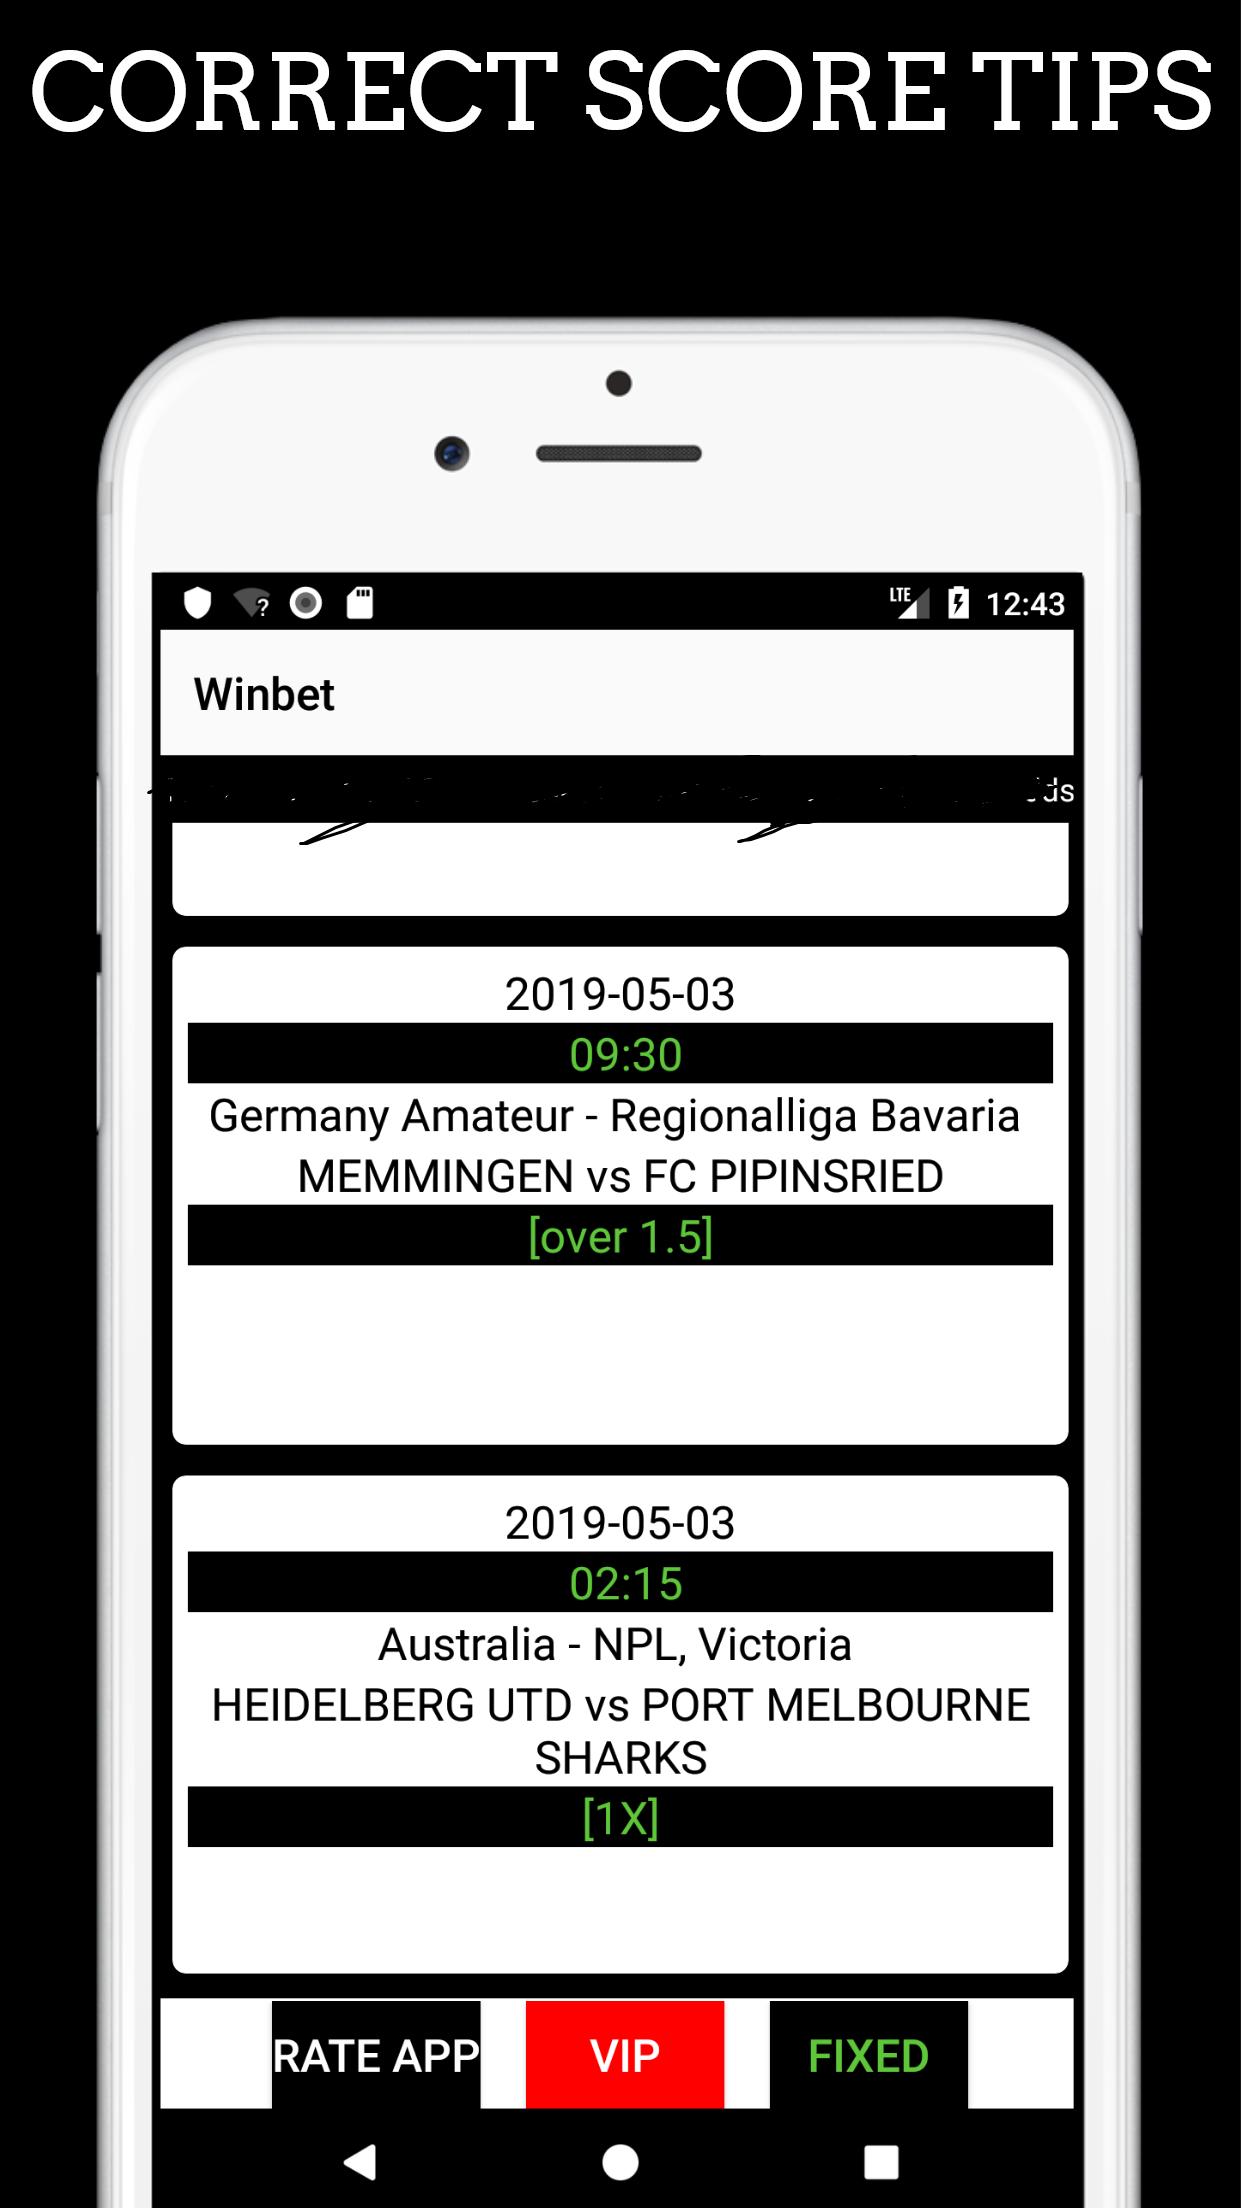 Welcome to a New Look Of Ball To Ball Cricket Betting App